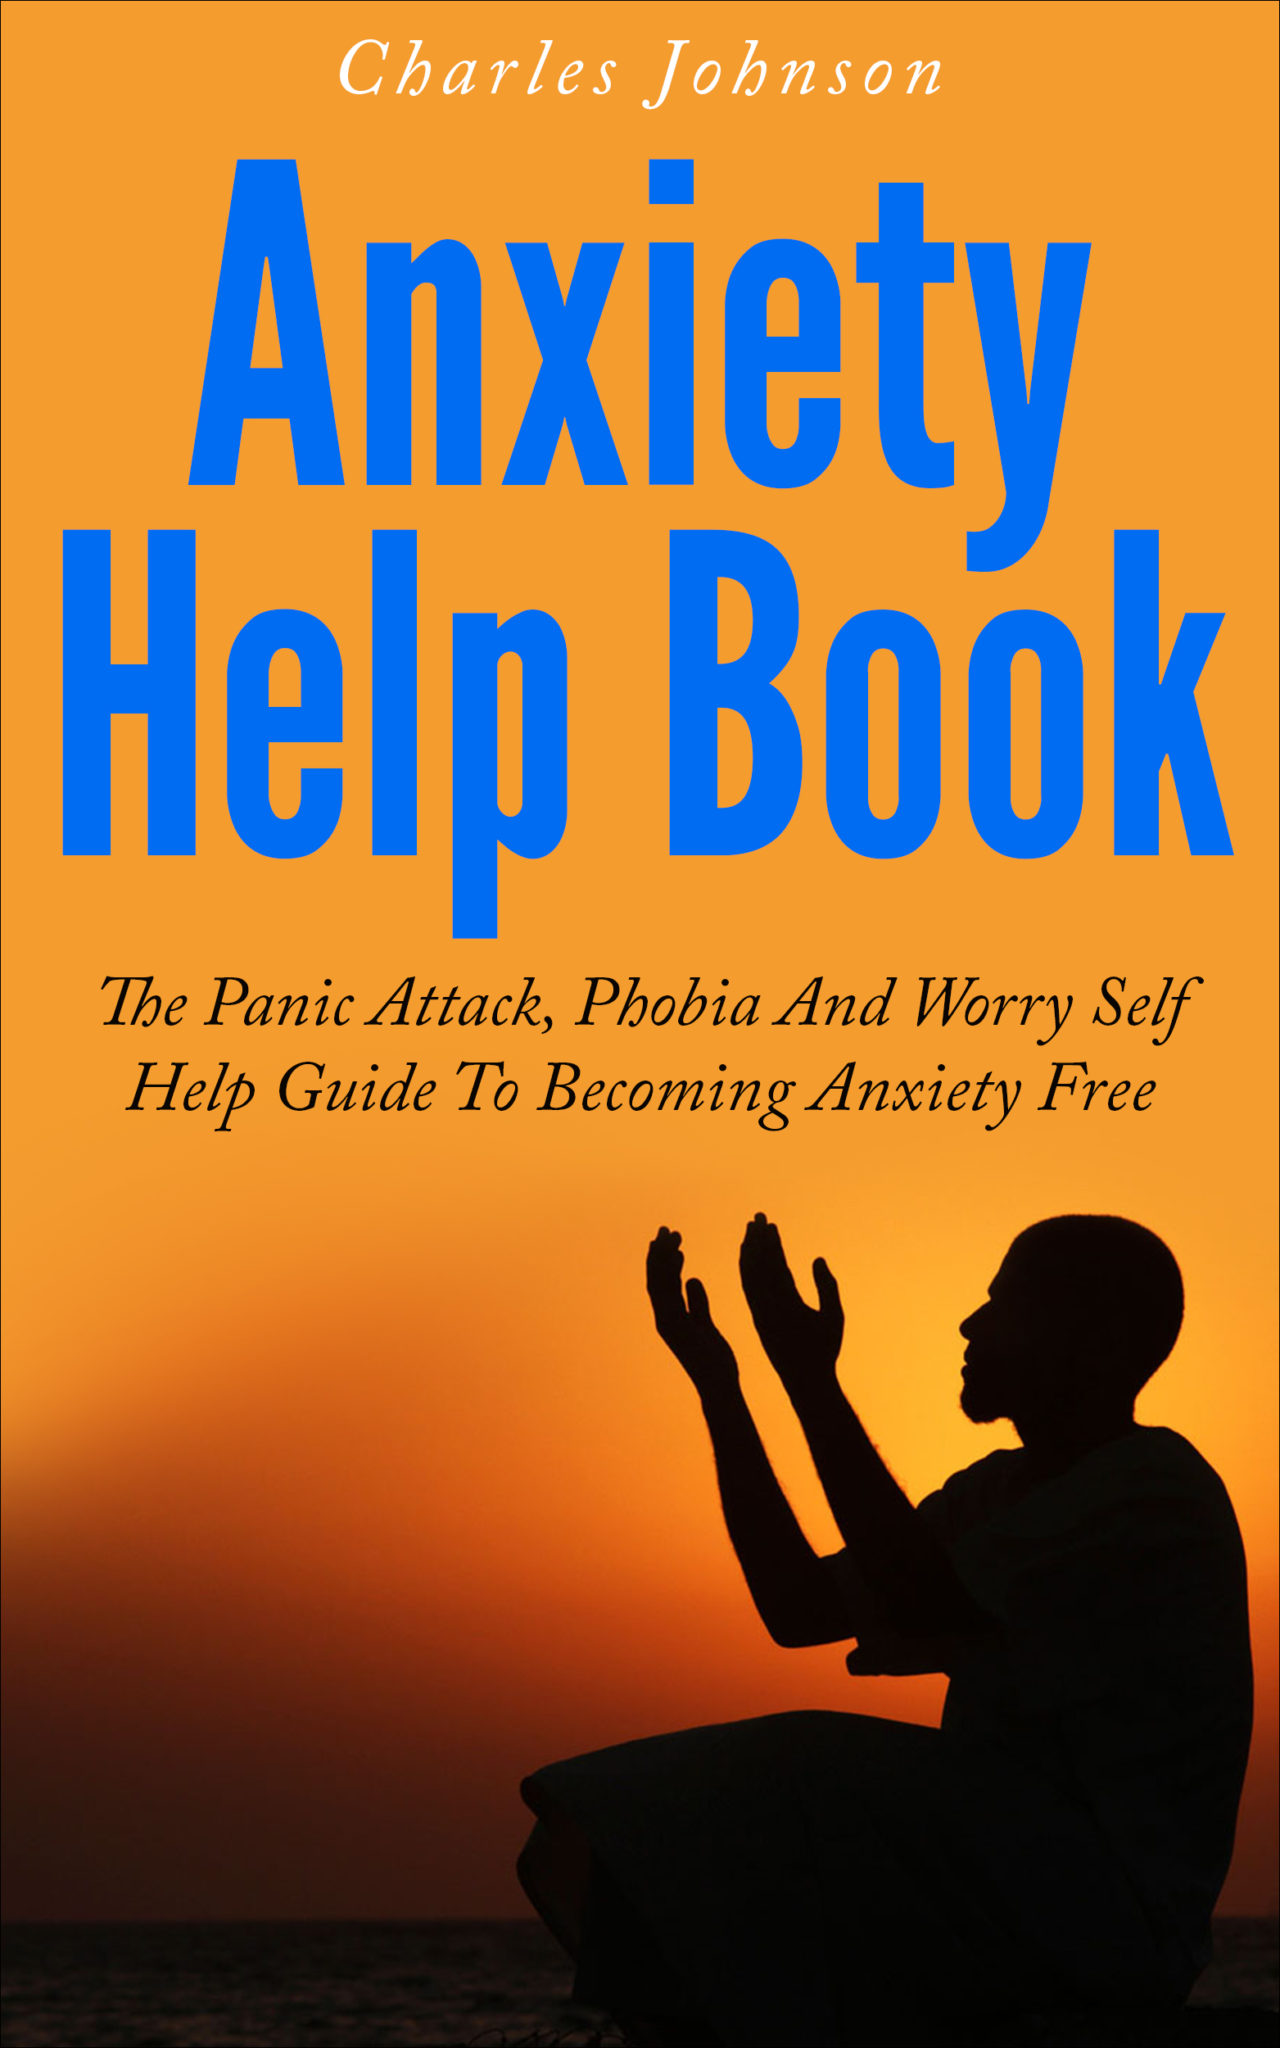 Anxiety Help Book: The Panic Attack, Phobia And Worry Self Help Guide To Becoming Anxiety Free by Charles Johnson